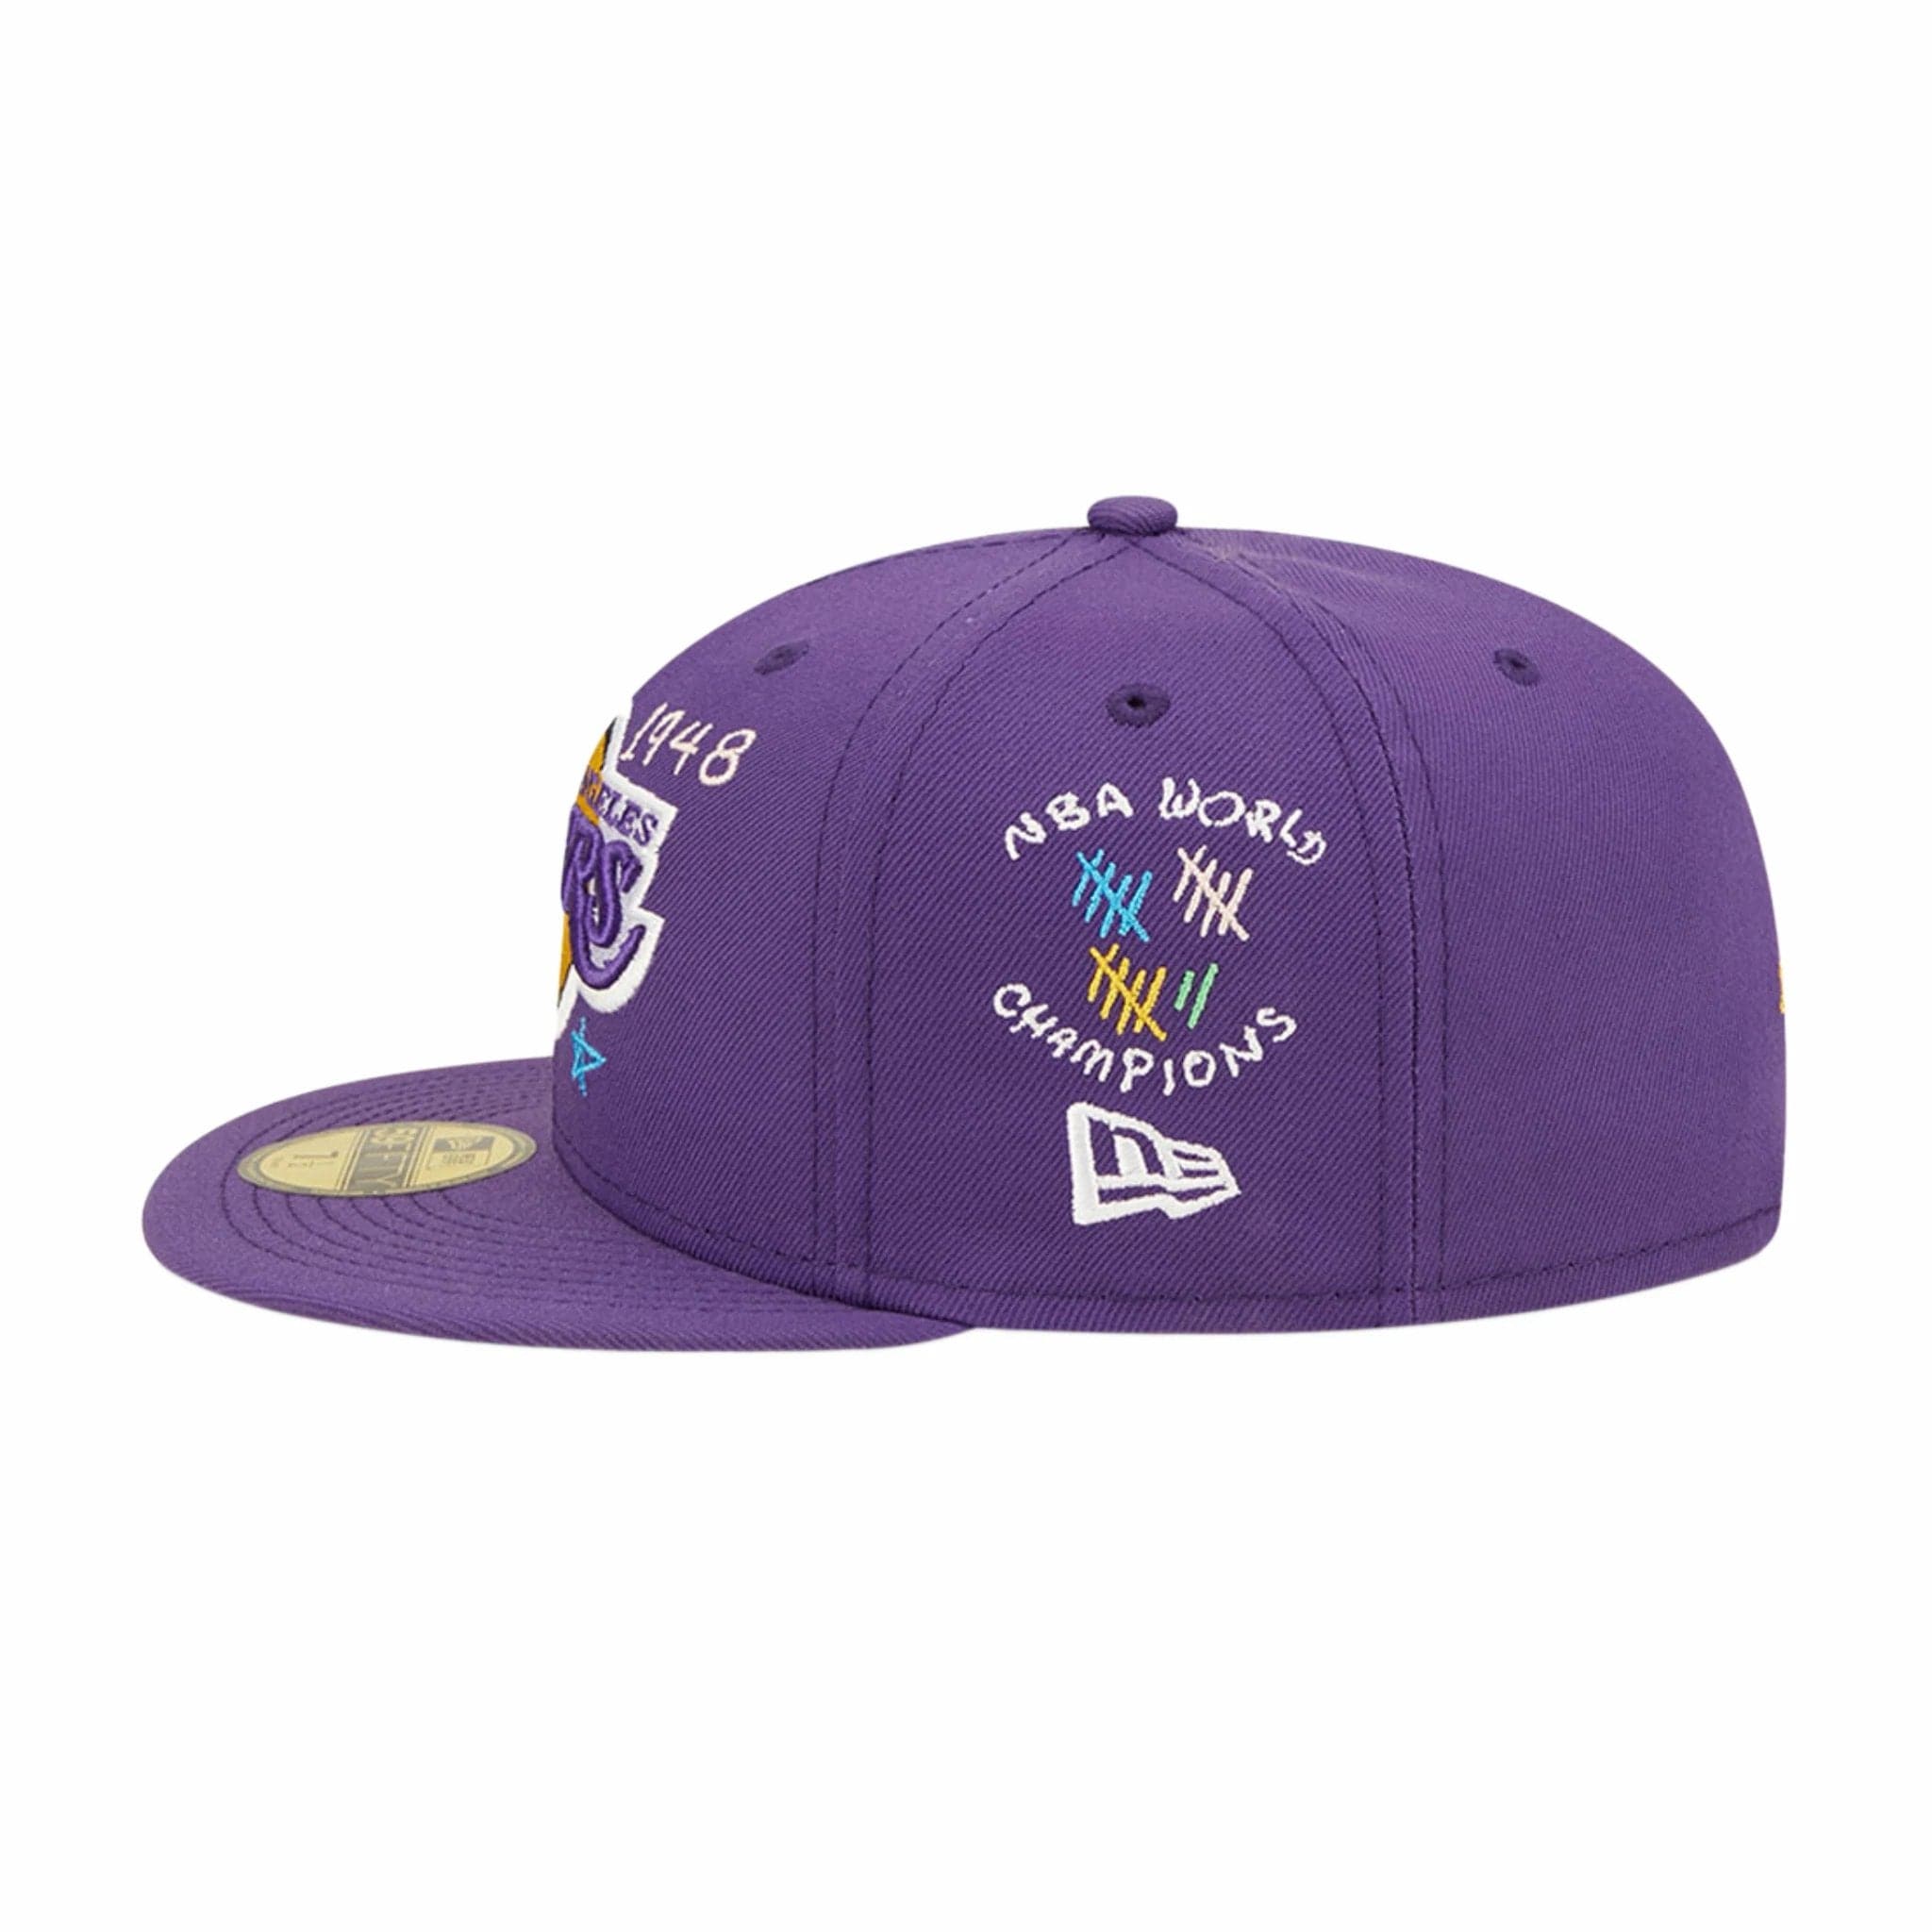 NEW ERA LOS ANGELES LAKERS "SCRIBBLE" 59FIFTY (PURPLE) - The Magnolia Park